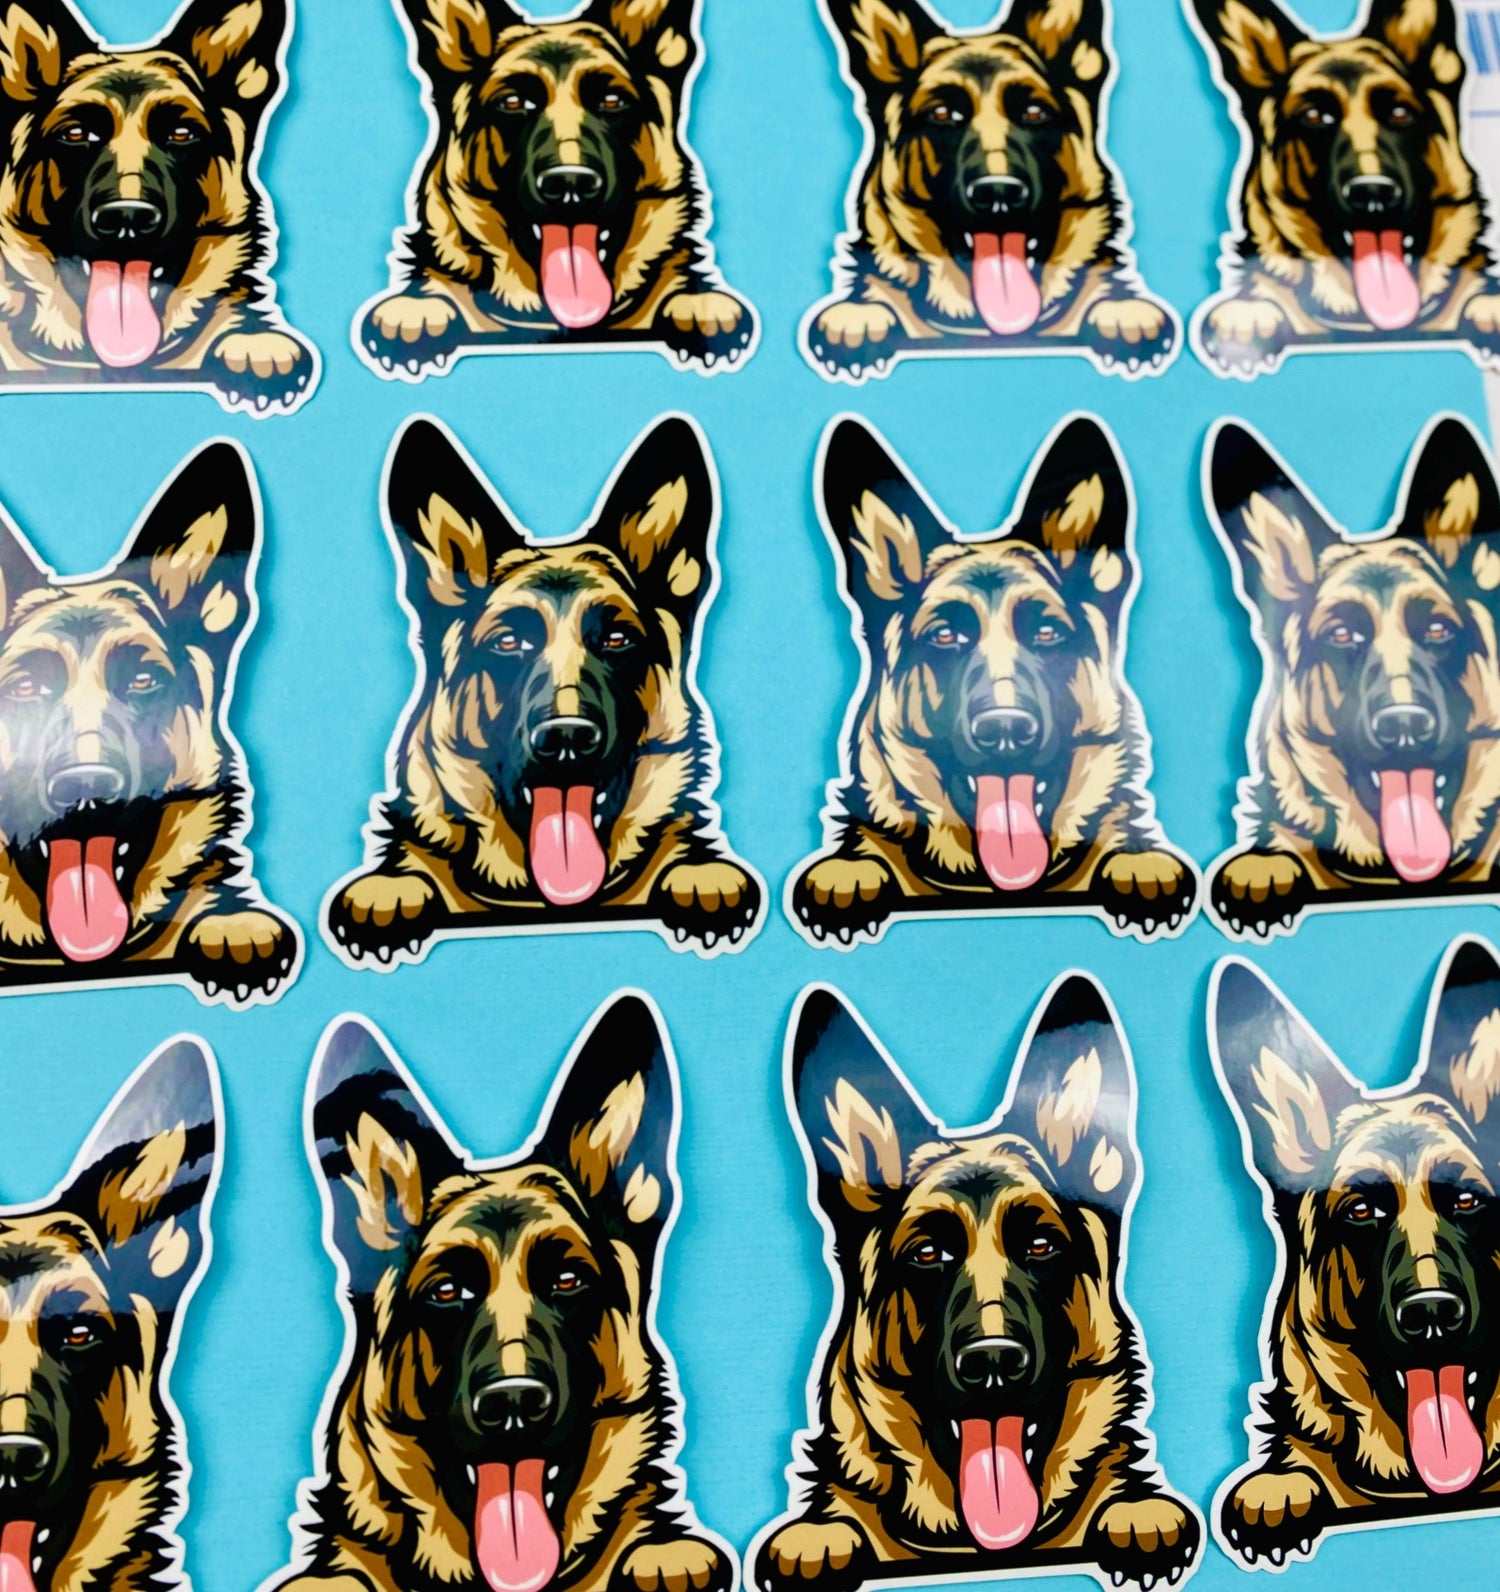 German Shephed Paws Sticker Cute GSD Dog Decal for Car, Hydroflask, Gifts Under 5 for GSD Shepherd Mom Owner, German Shepherd Gift - Ottos Grotto :: Stickers For Your Stuff